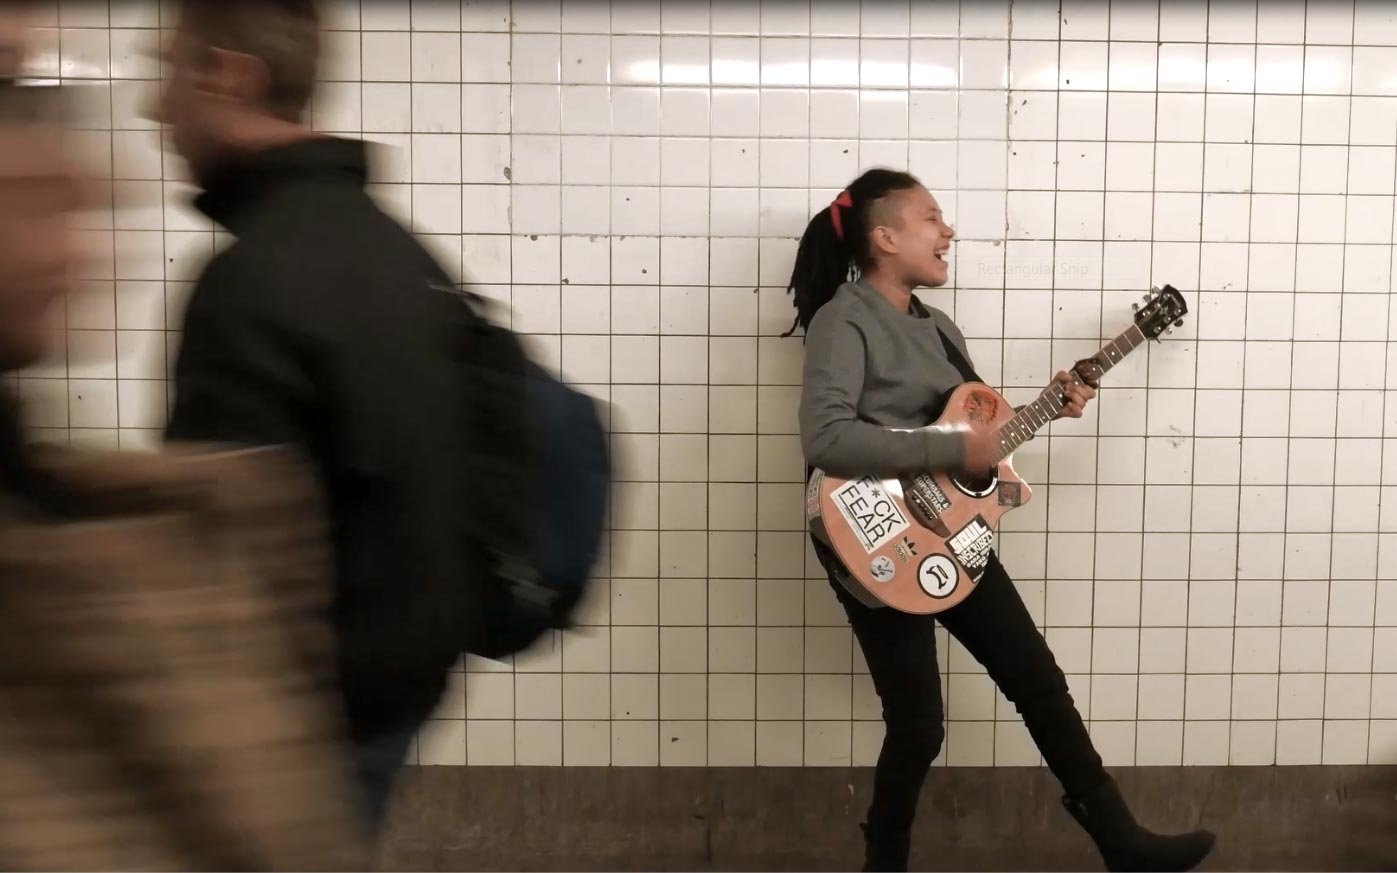 A person singing and playing guitar in a subway station